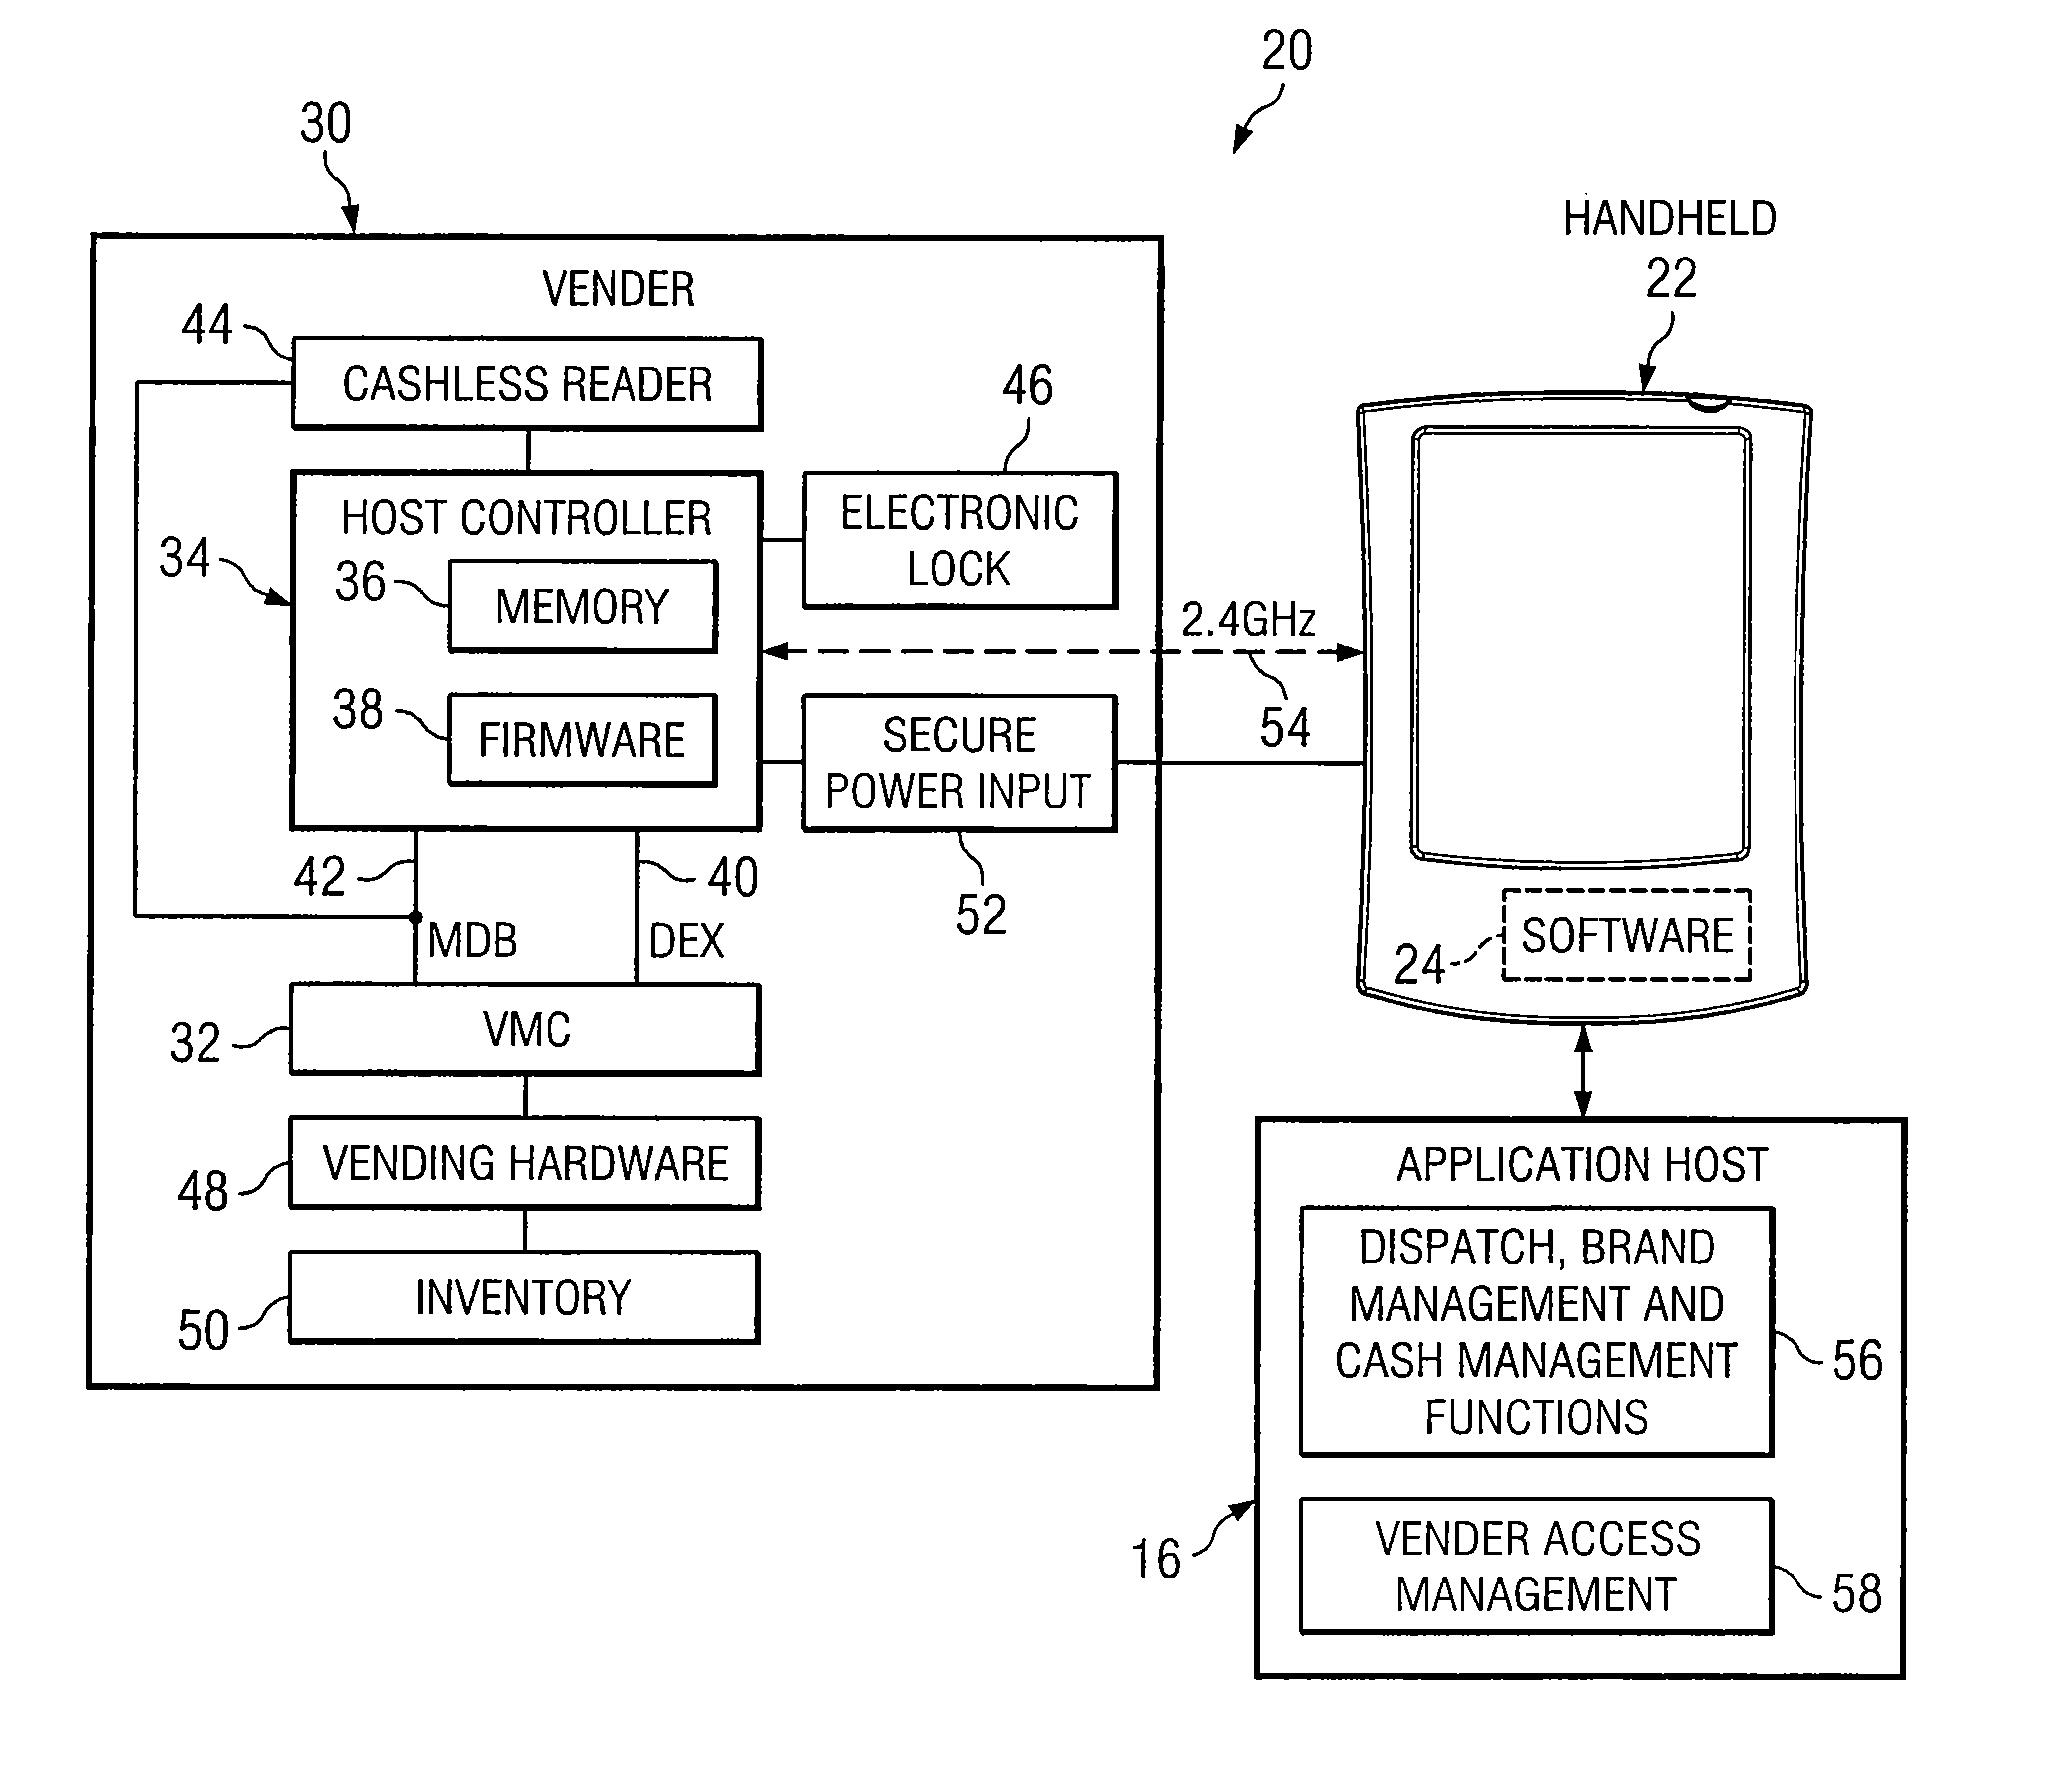 Apparatus and Method for Controlling Access to Remotely Located Equipment